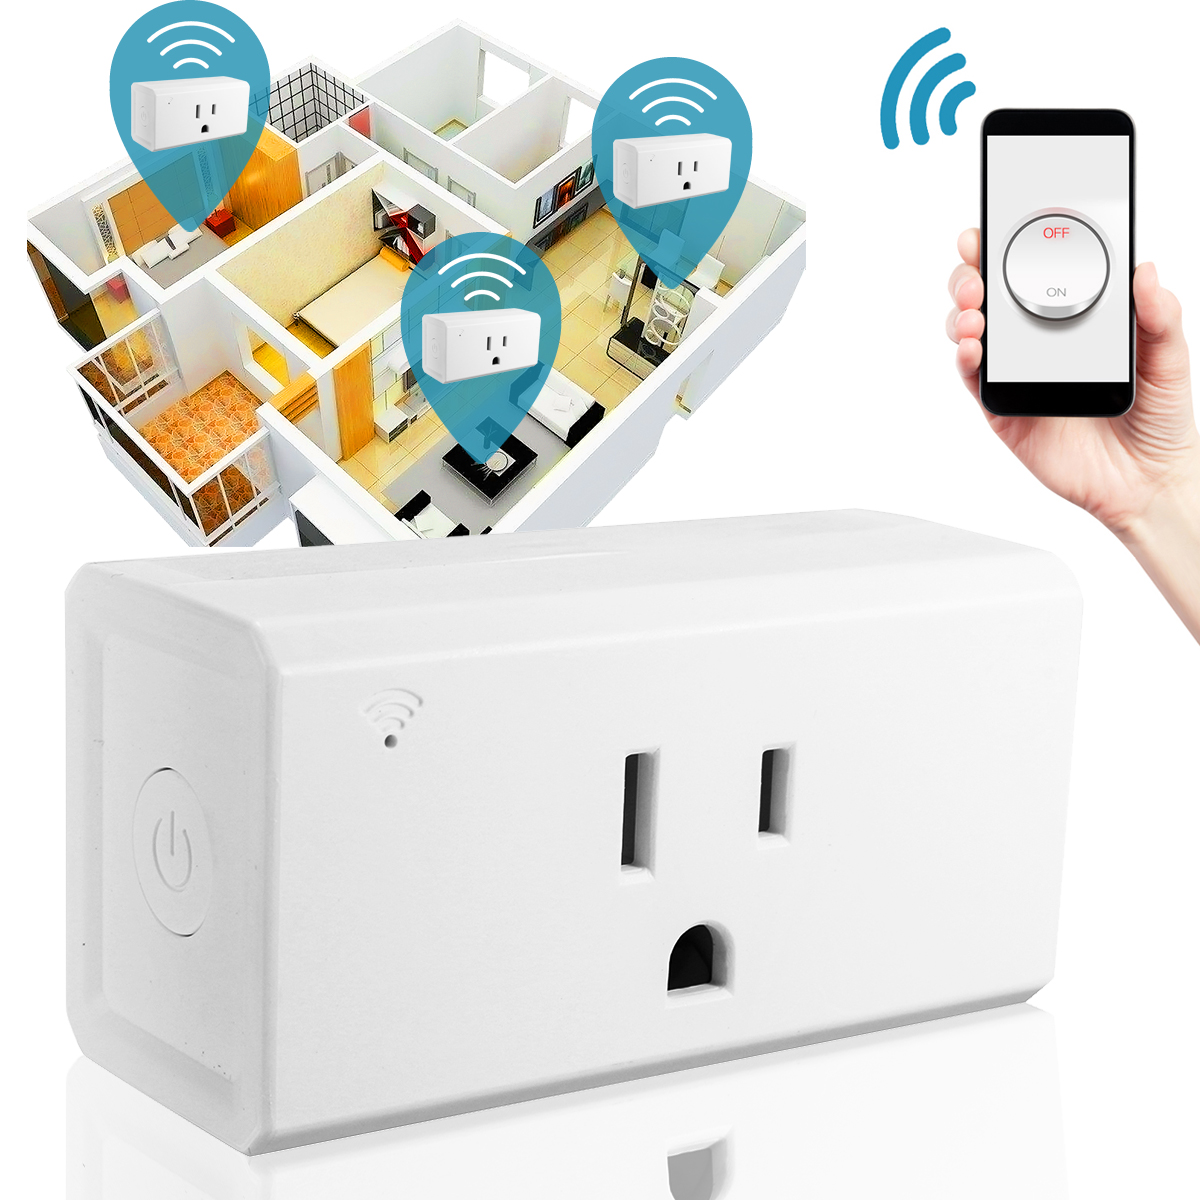 Excellwayreg-Wifi-Smart-Plug-Smart-Socket-Outlet-Compatible-with-Alexa-and-Google-Home-Voice-Control-1258076-7